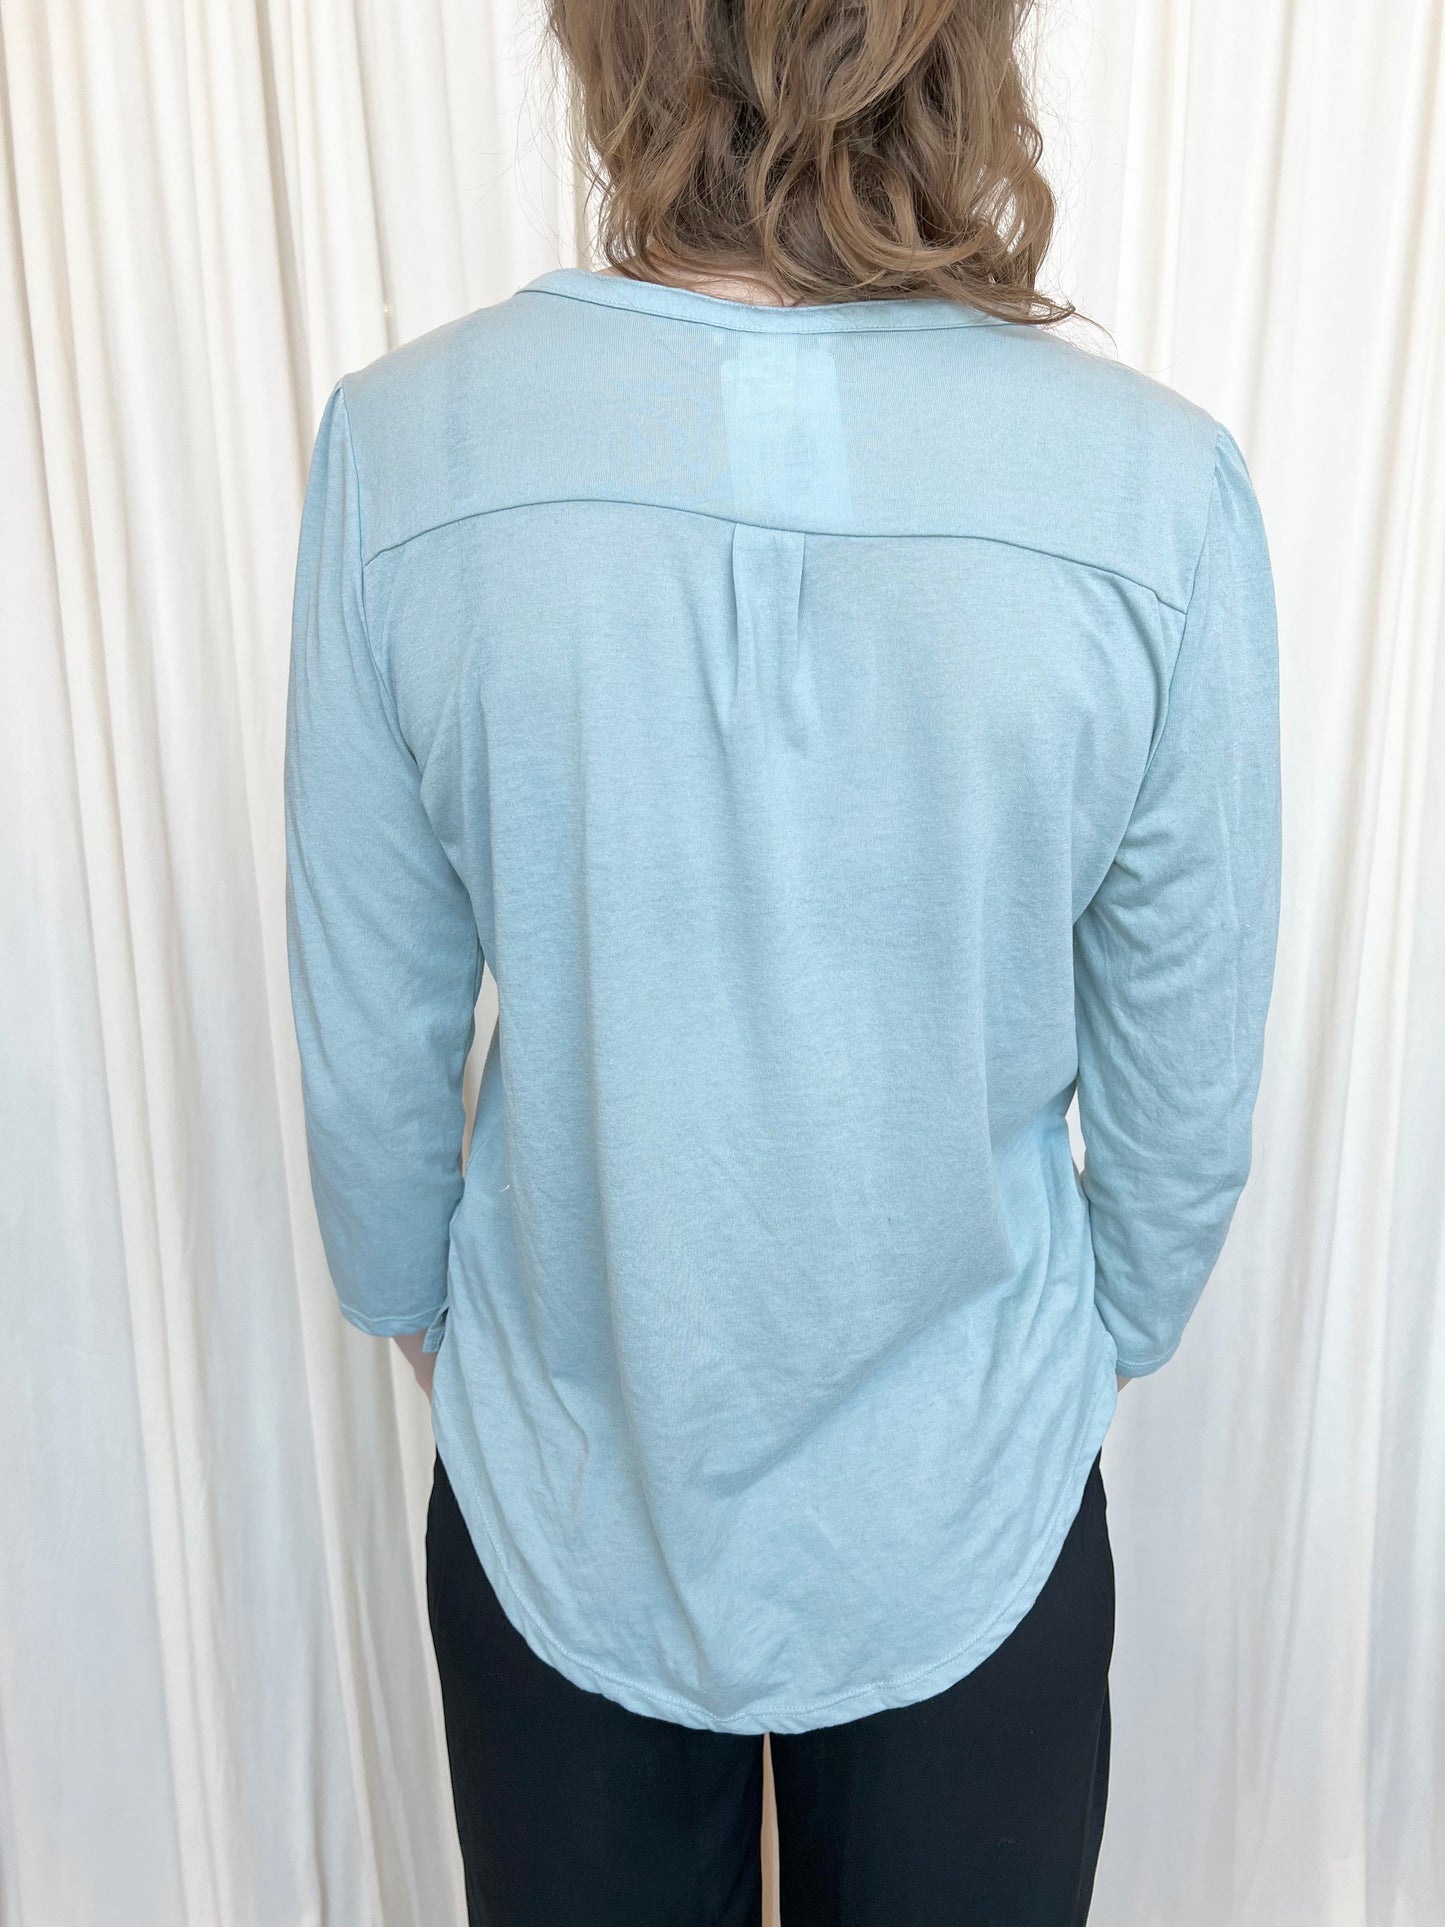 Blue Henley Blouse - Small